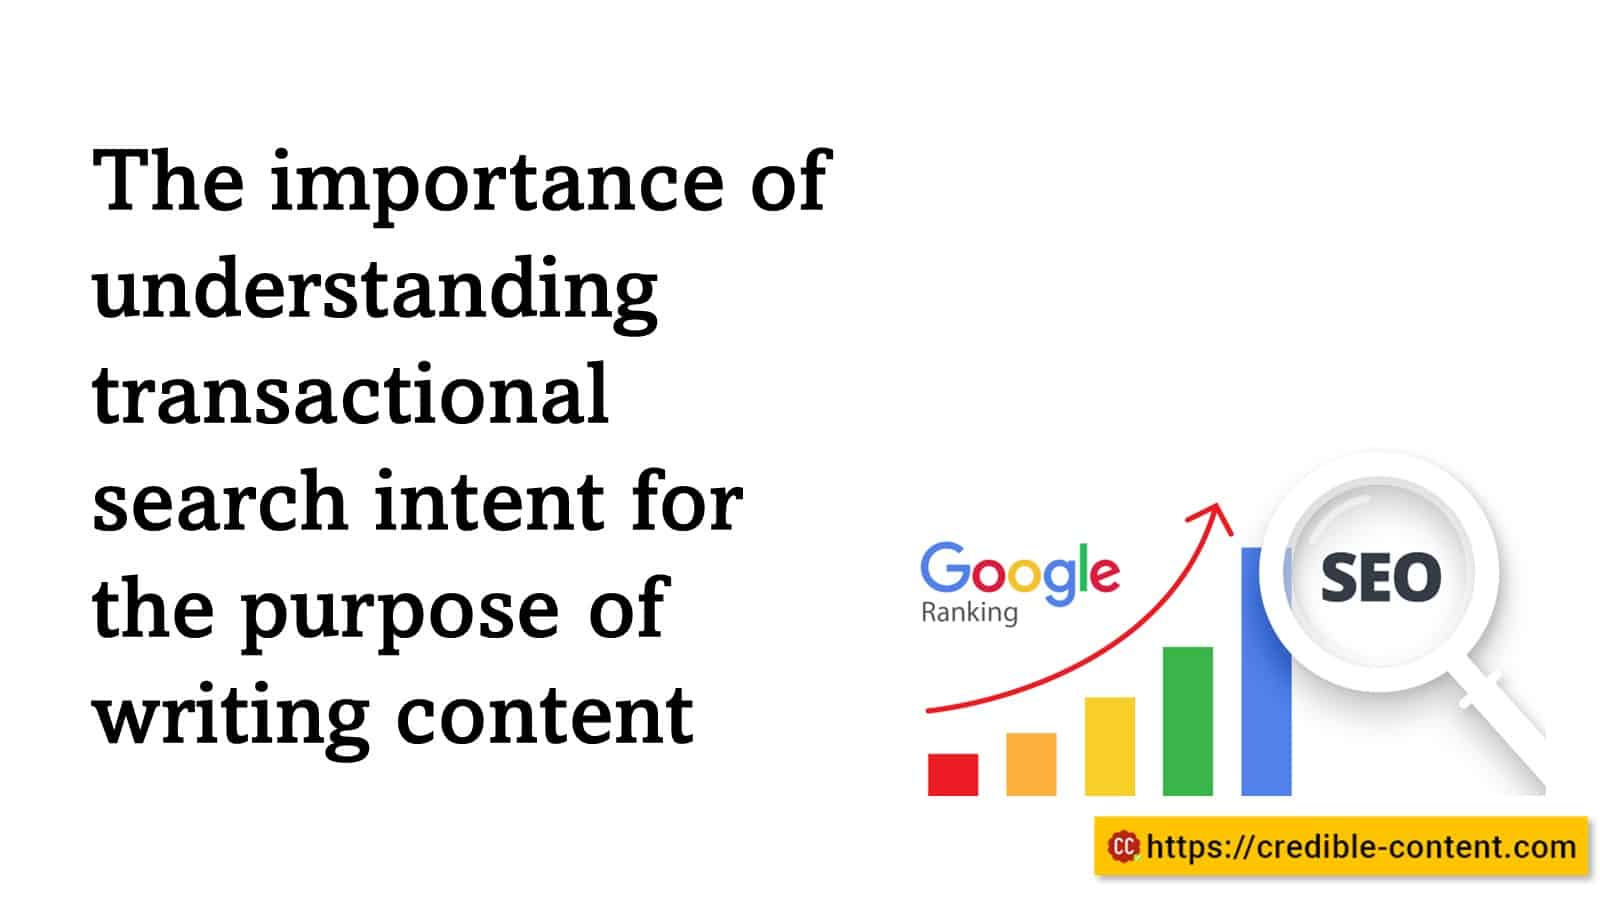 The importance of understanding transactional search intent for the purpose of writing content